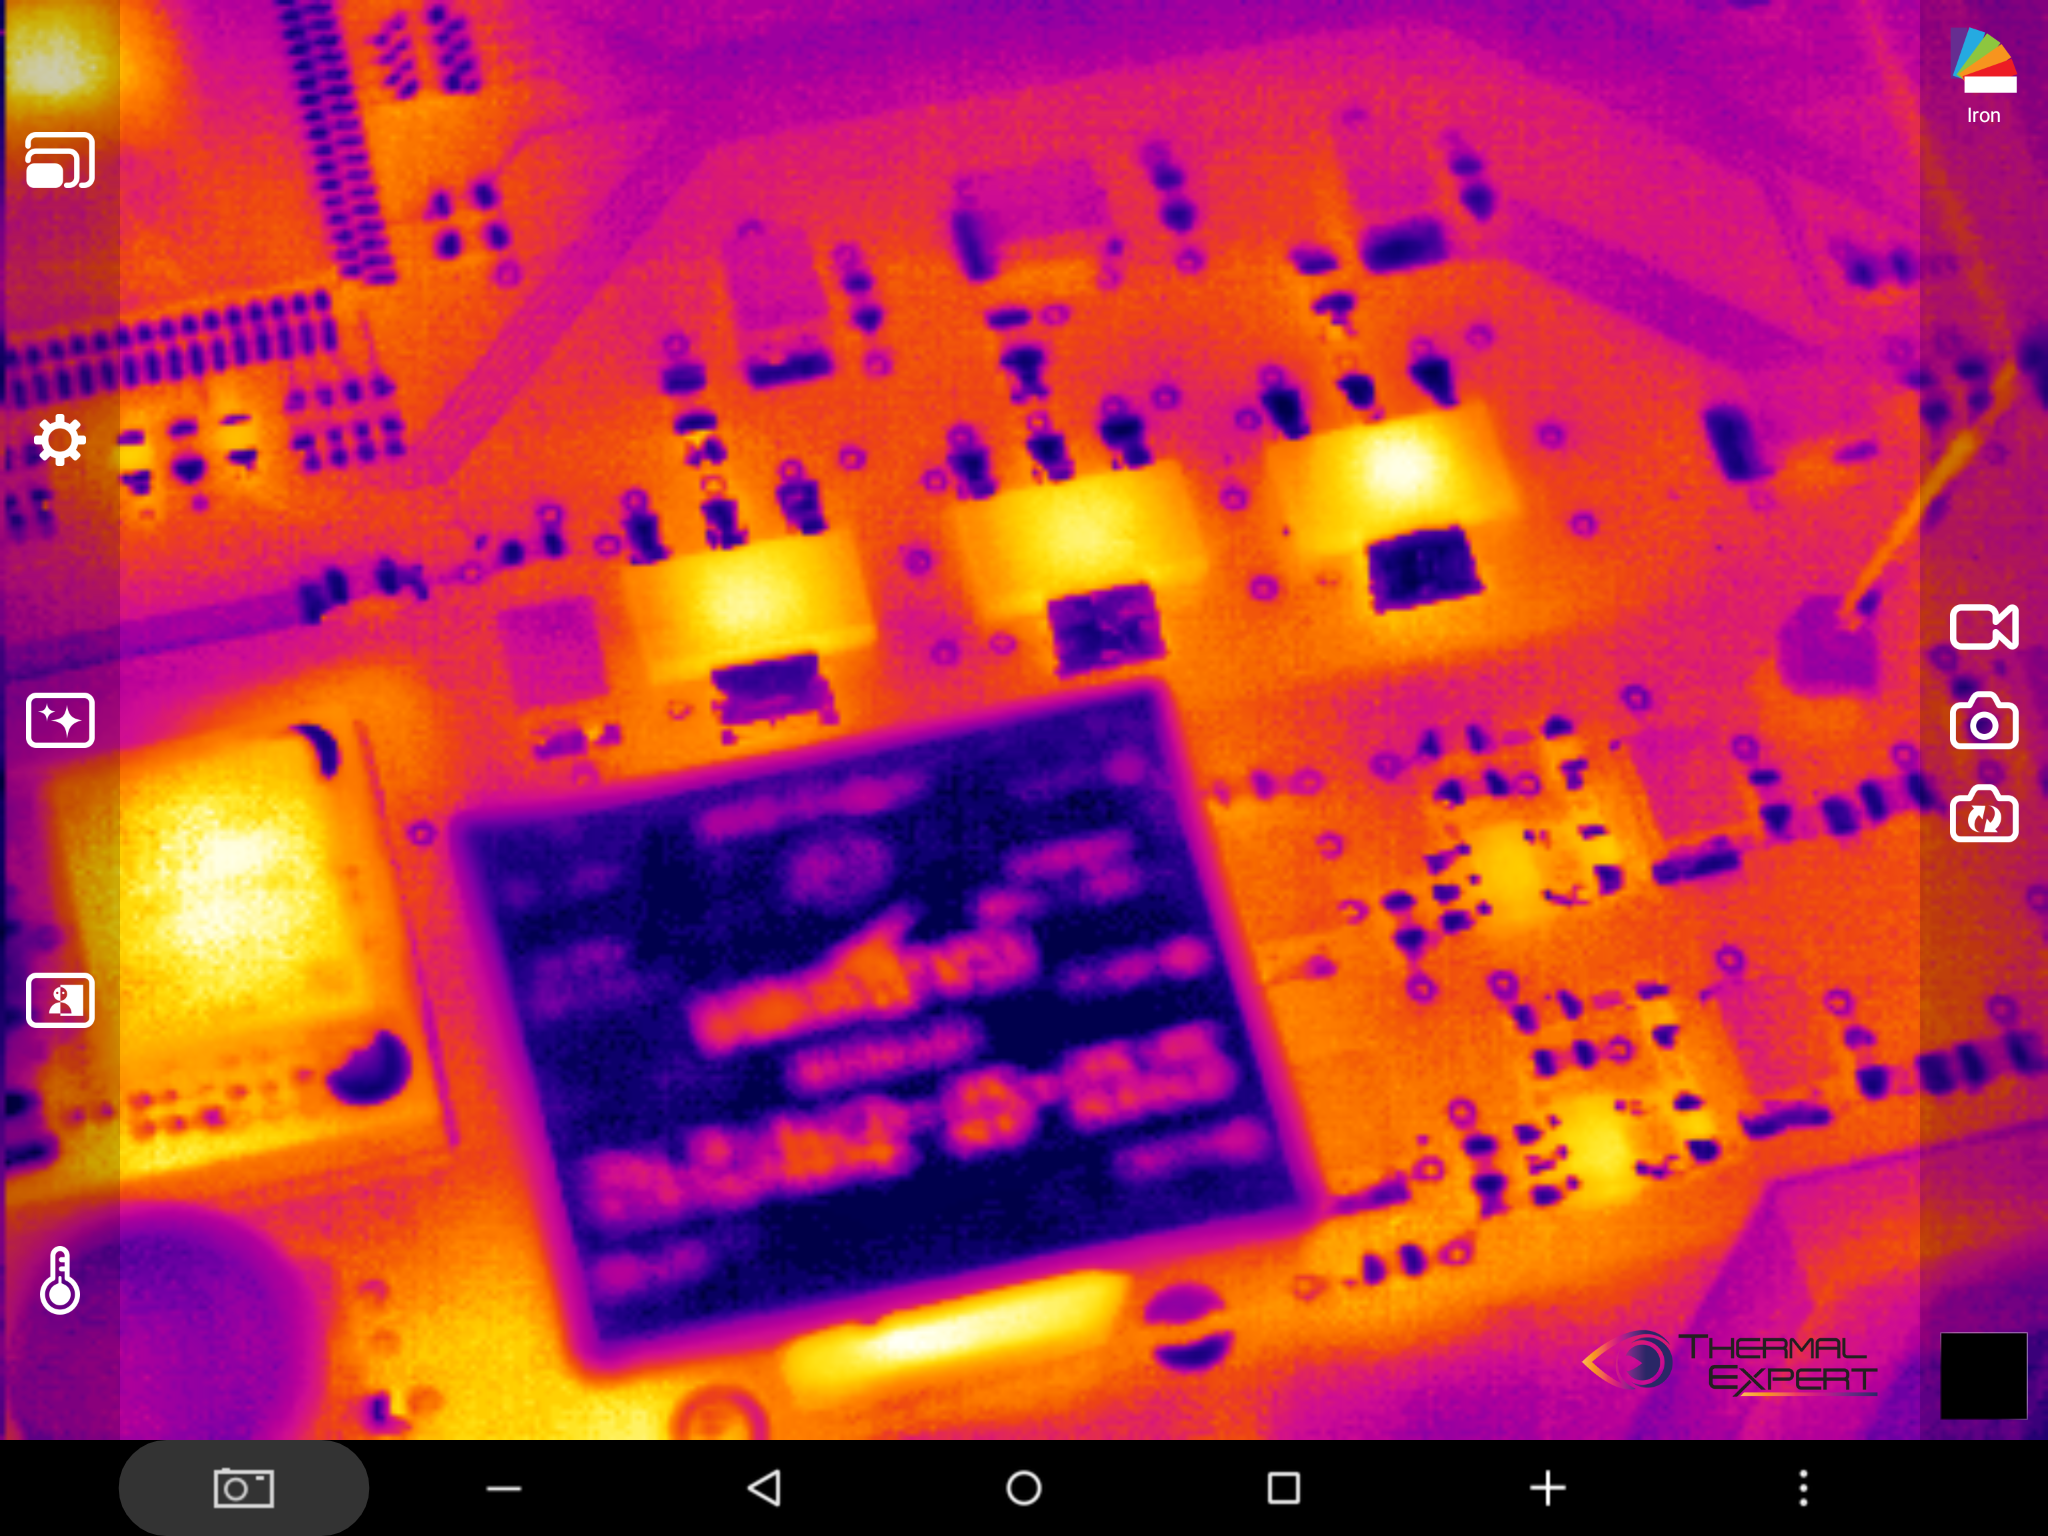 Android application Thermal Expert screenshort